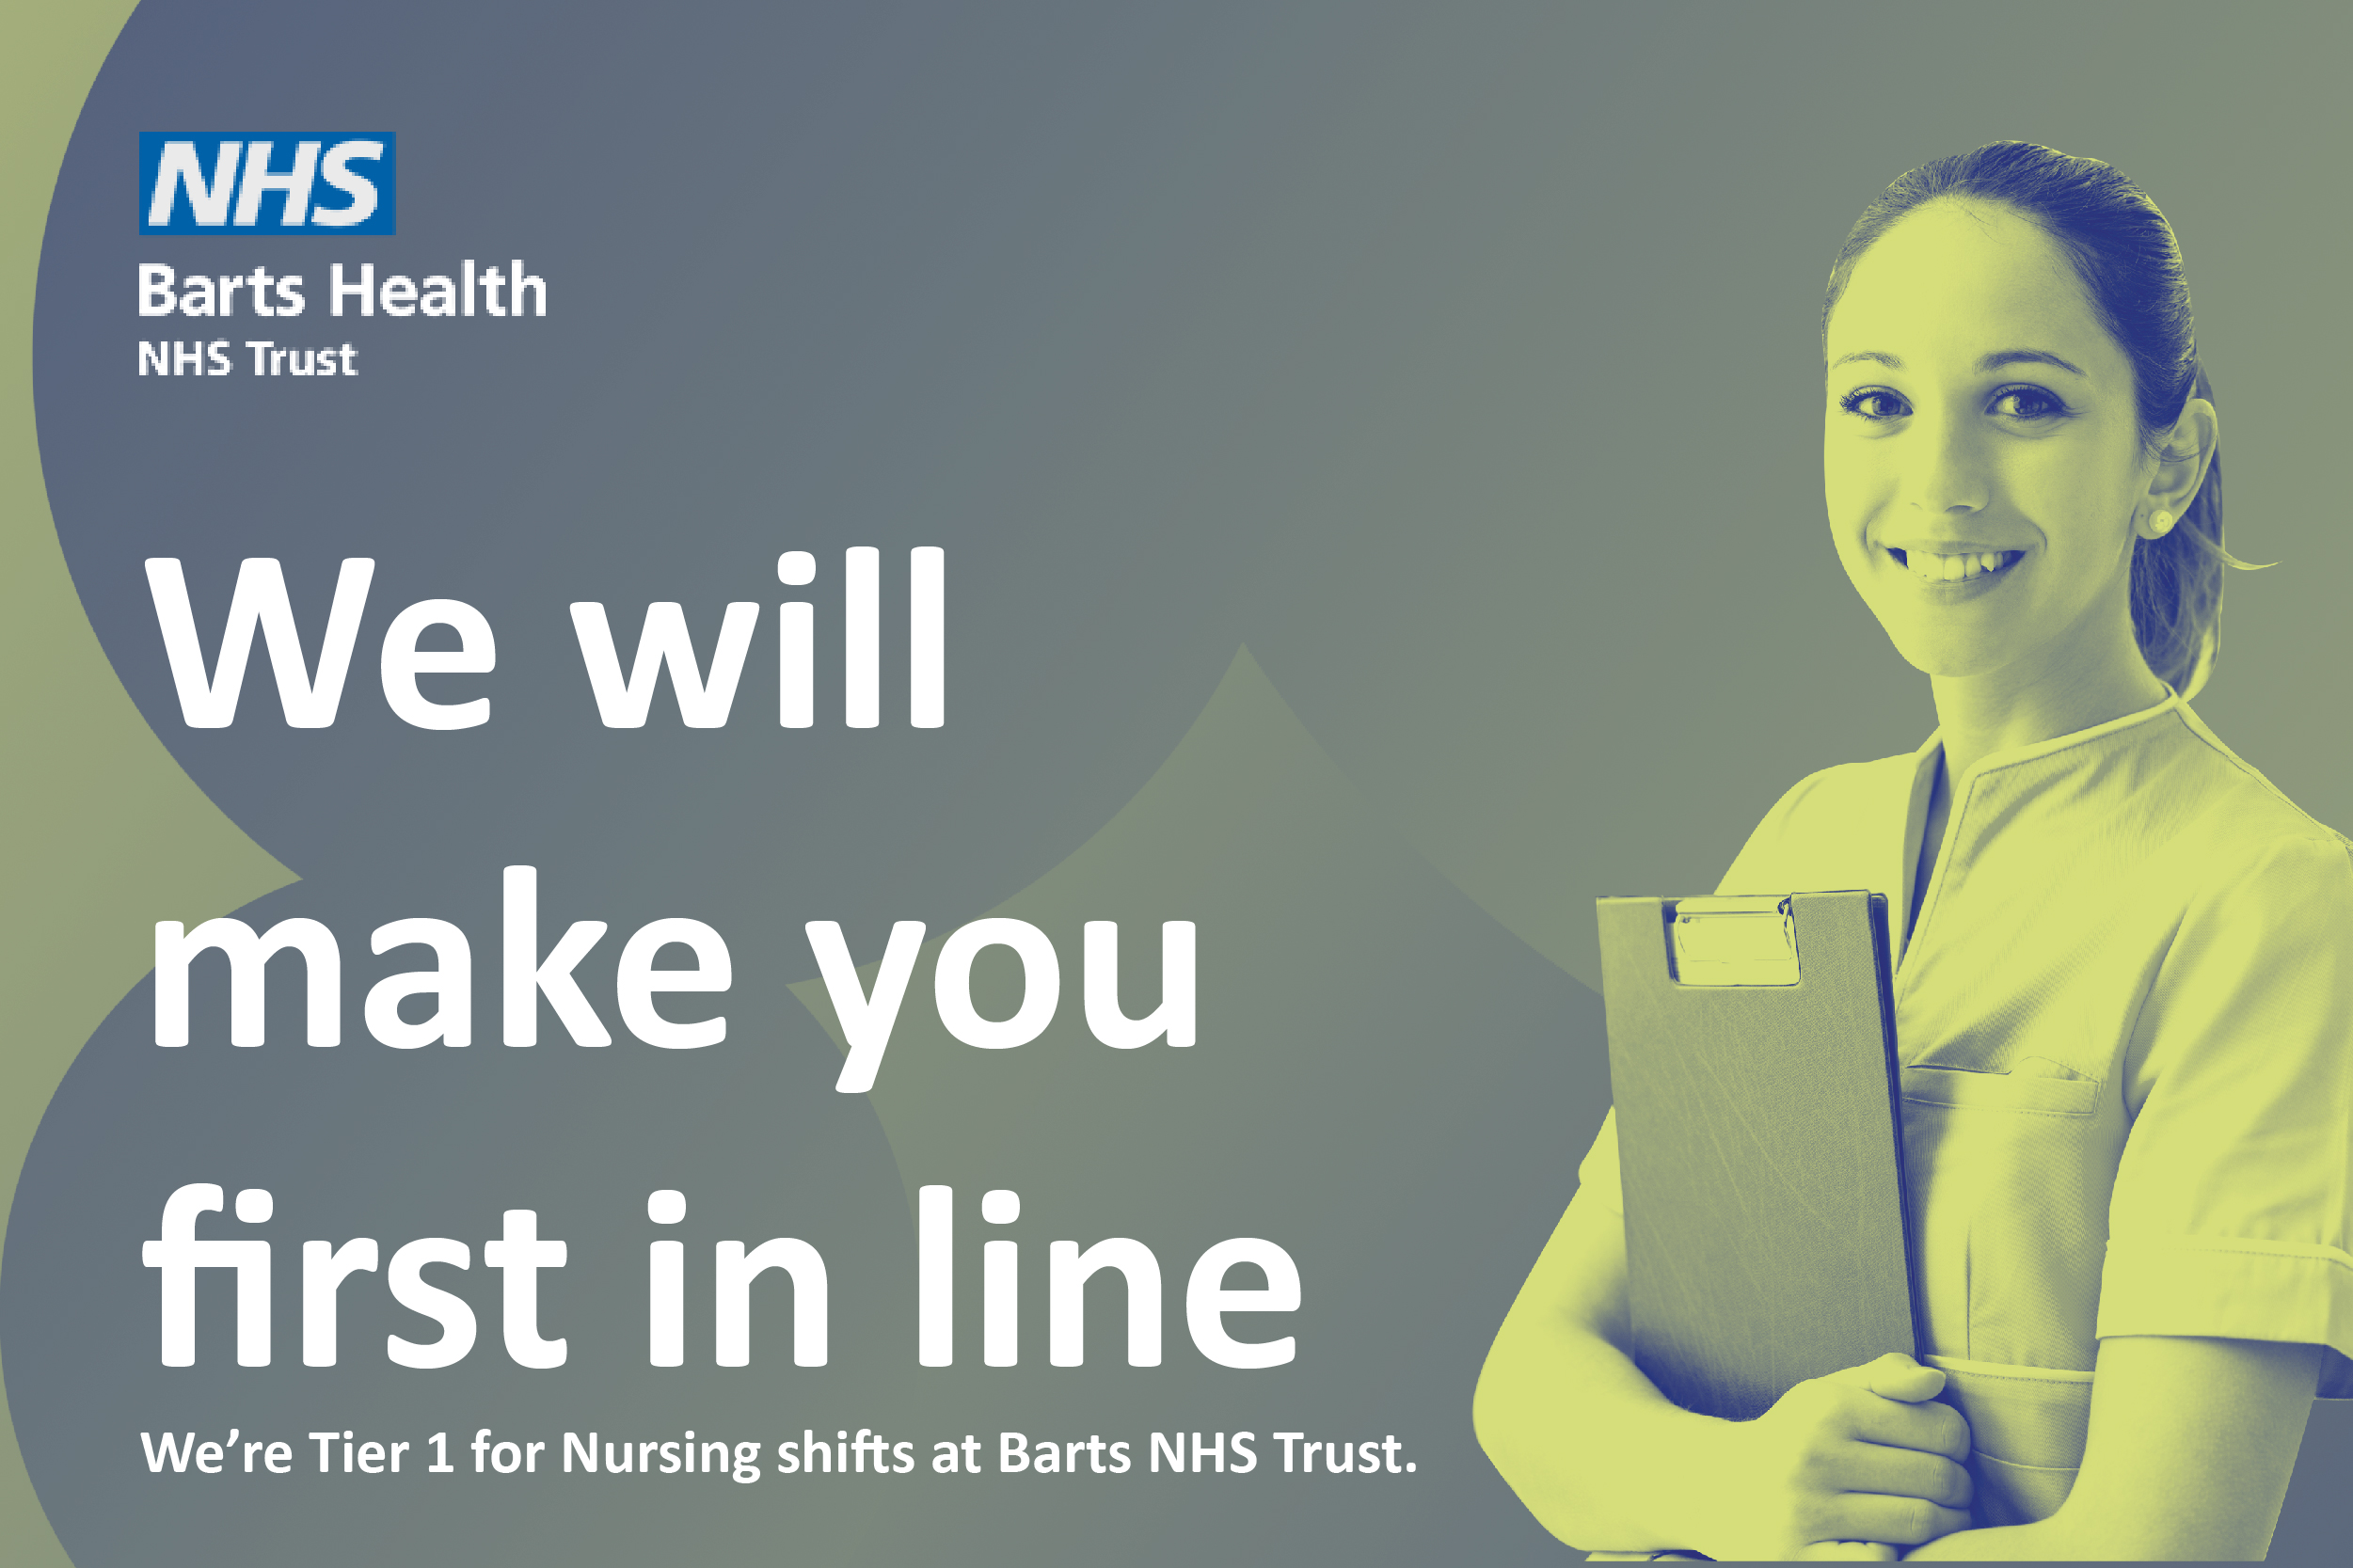 View First in line for Nursing shifts at Barts NHS Trust